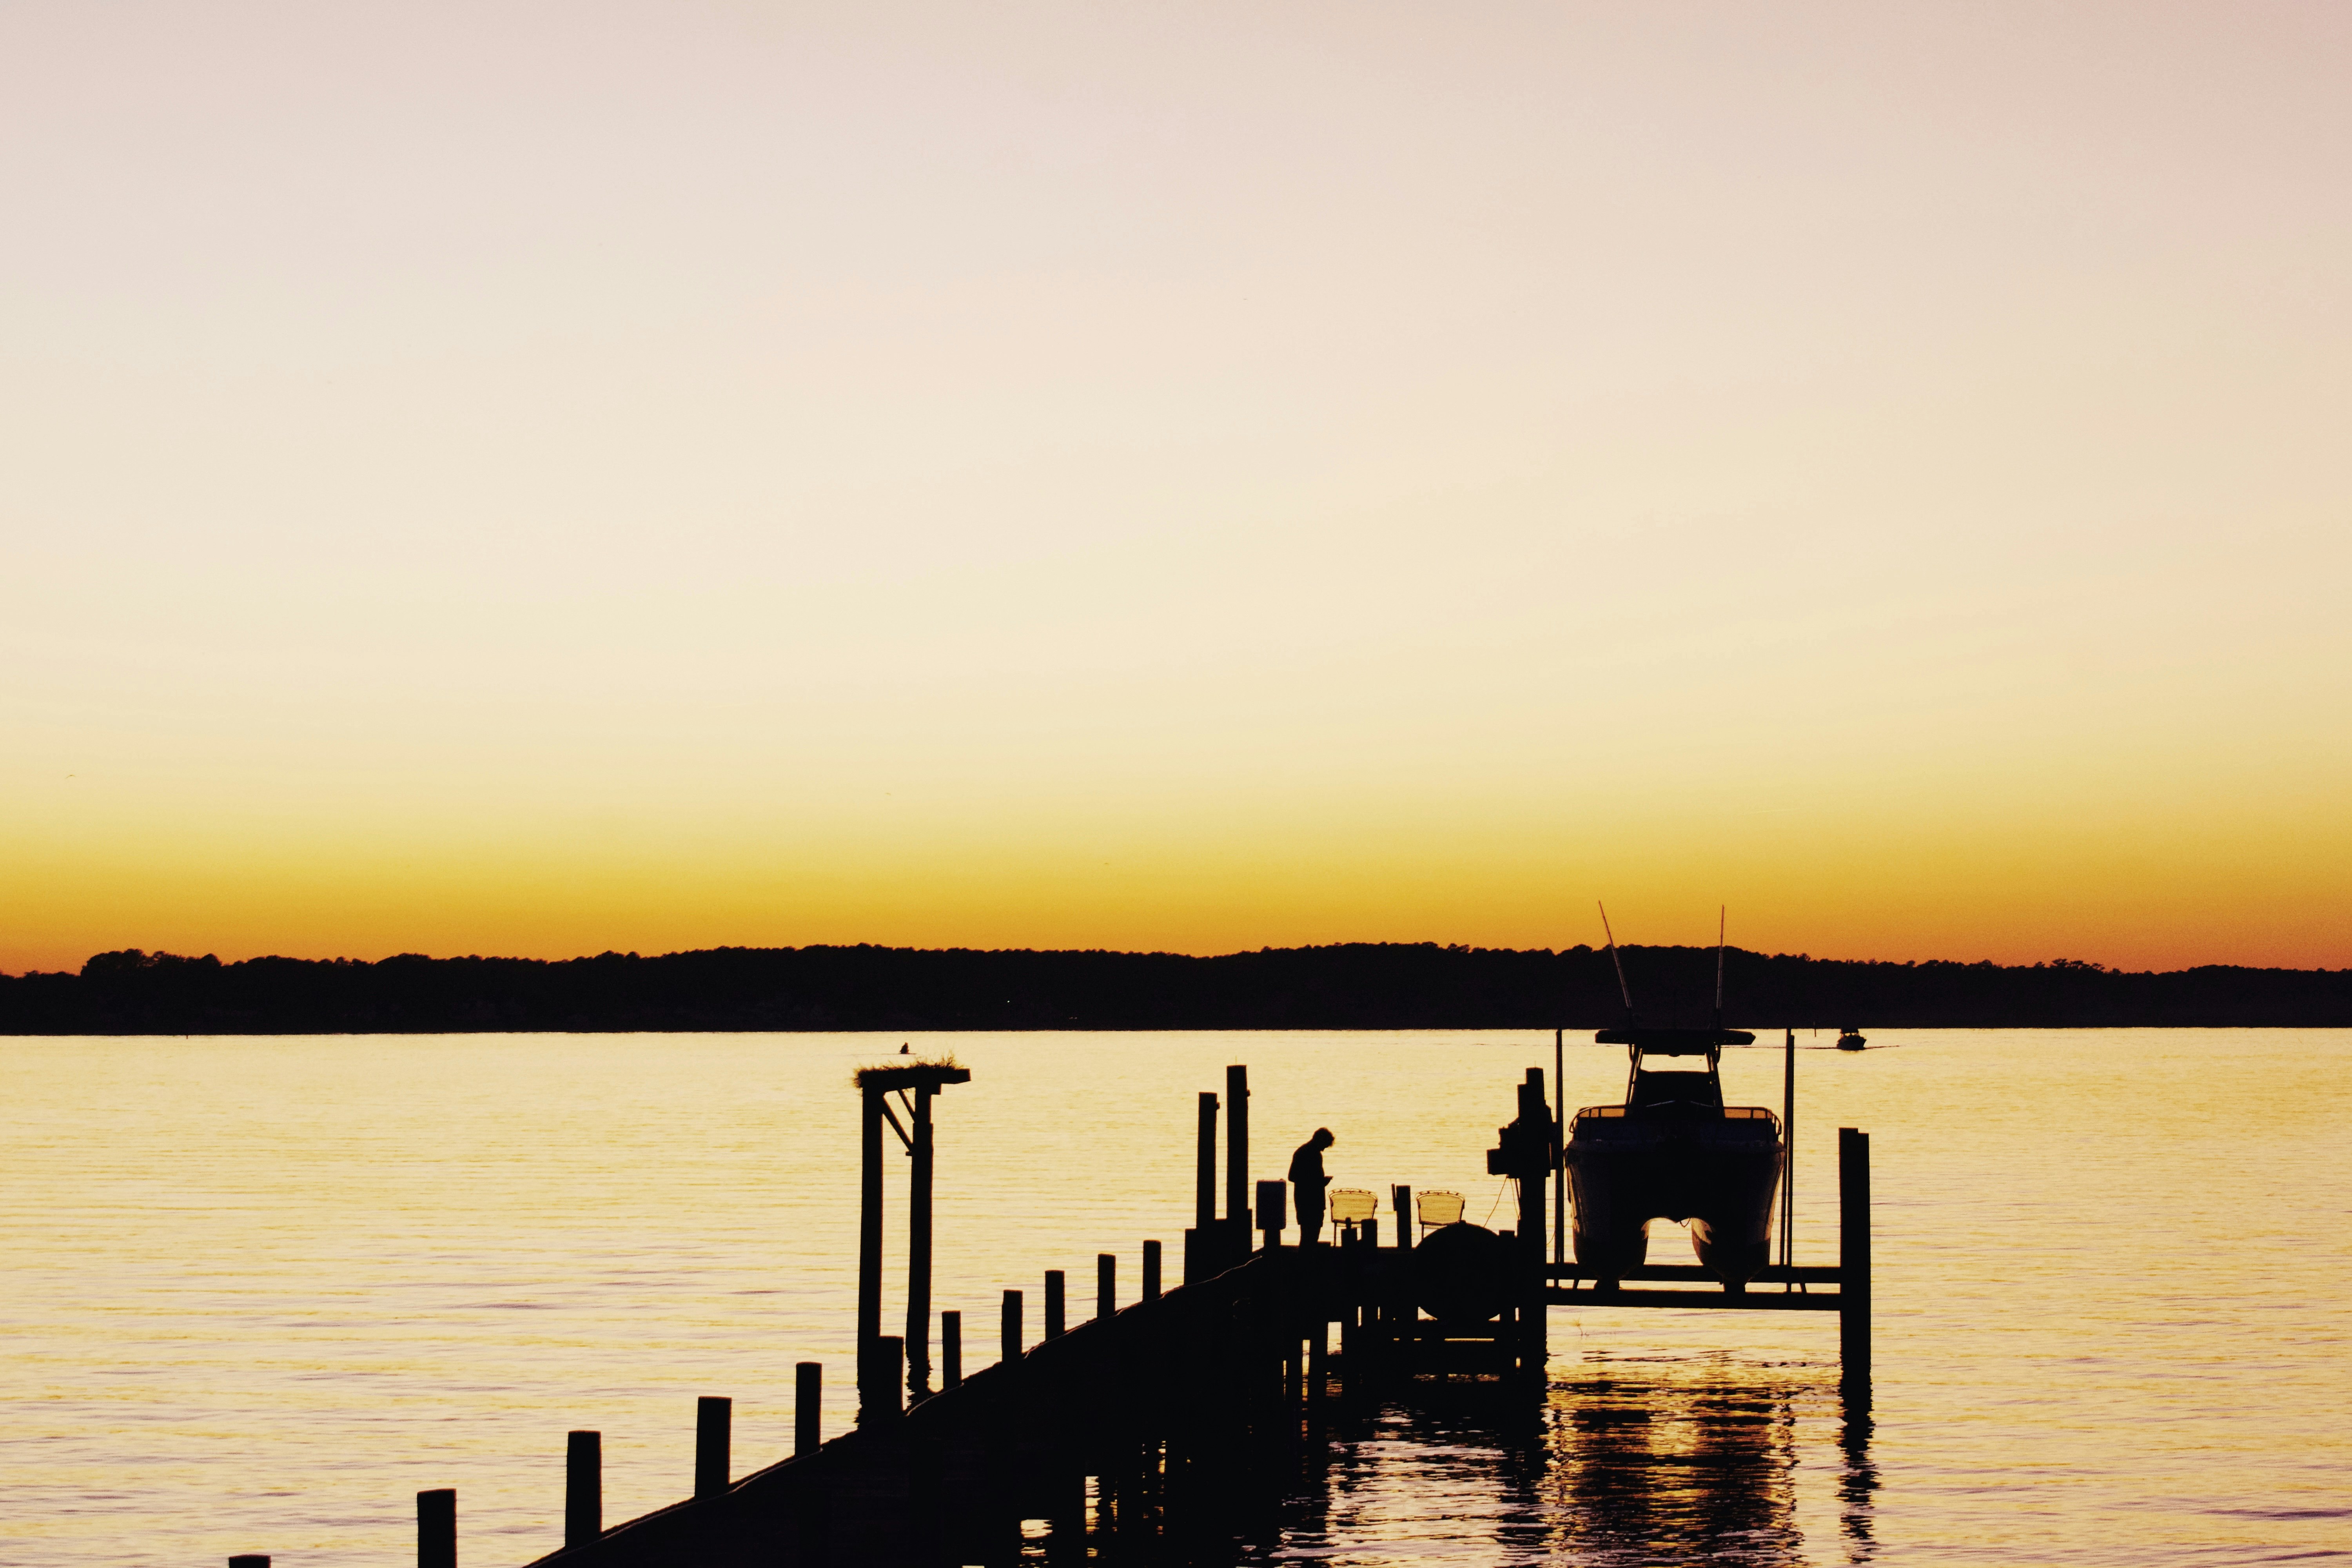 A sunset over the Potomac River with a dock and boat on the river in the foreground.